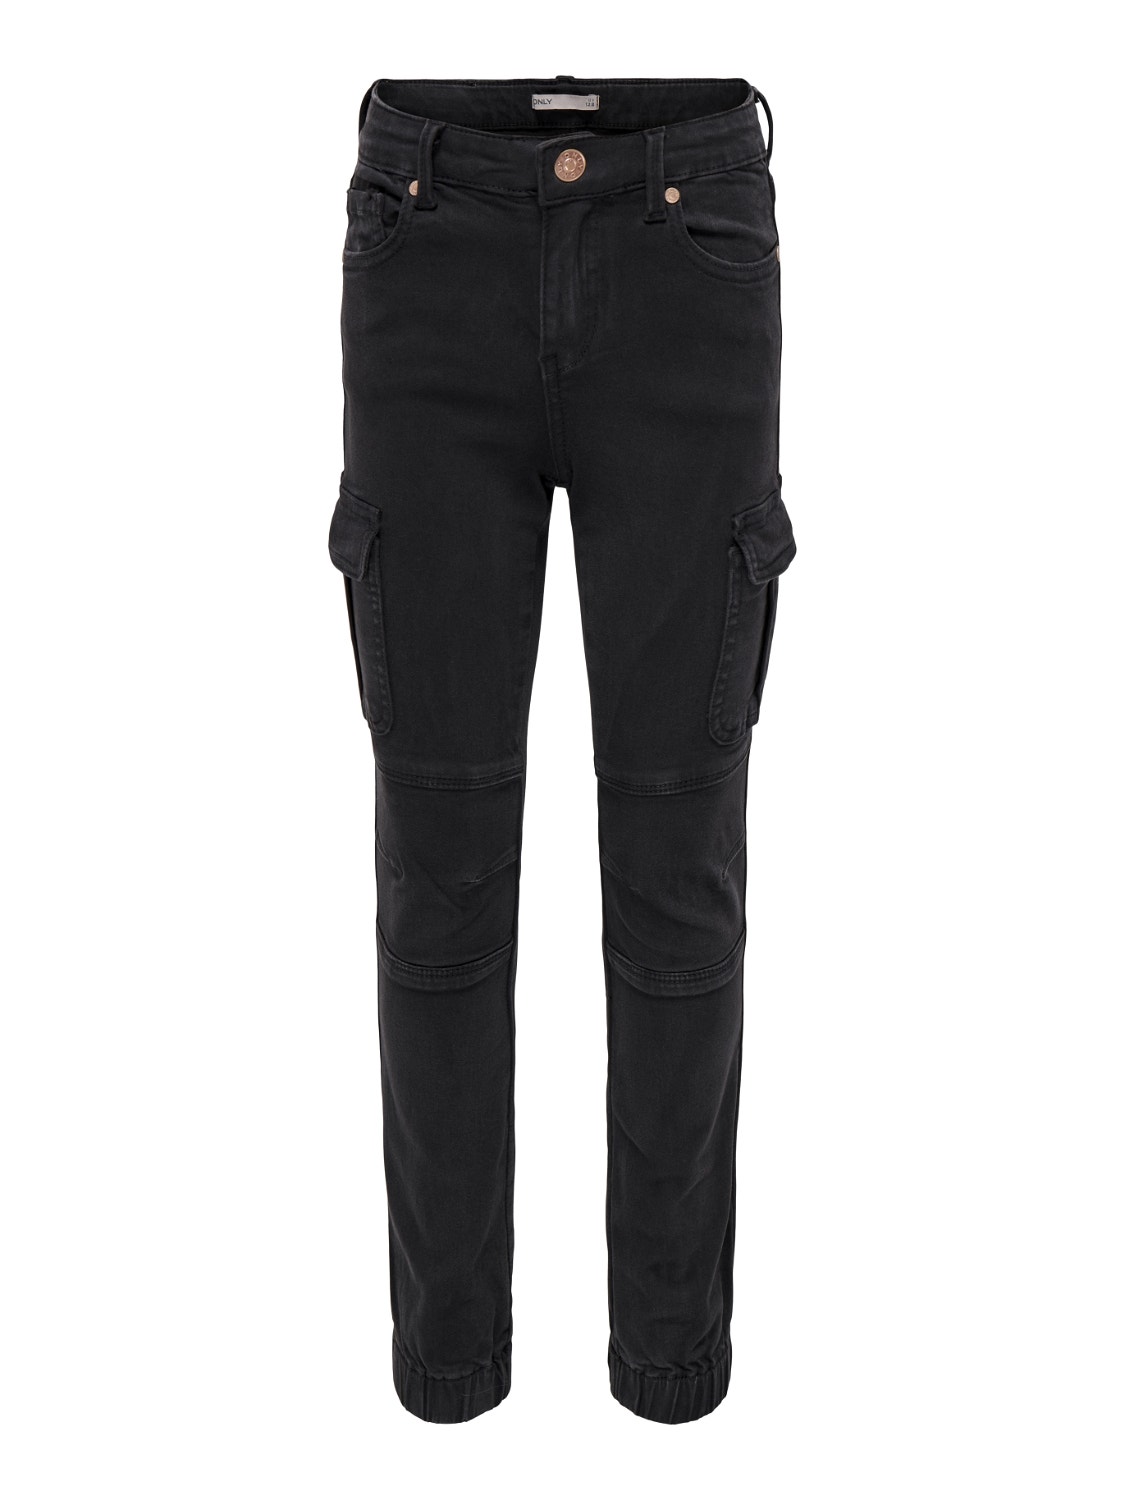 ONLY Cargo Trousers -Black - 15221844